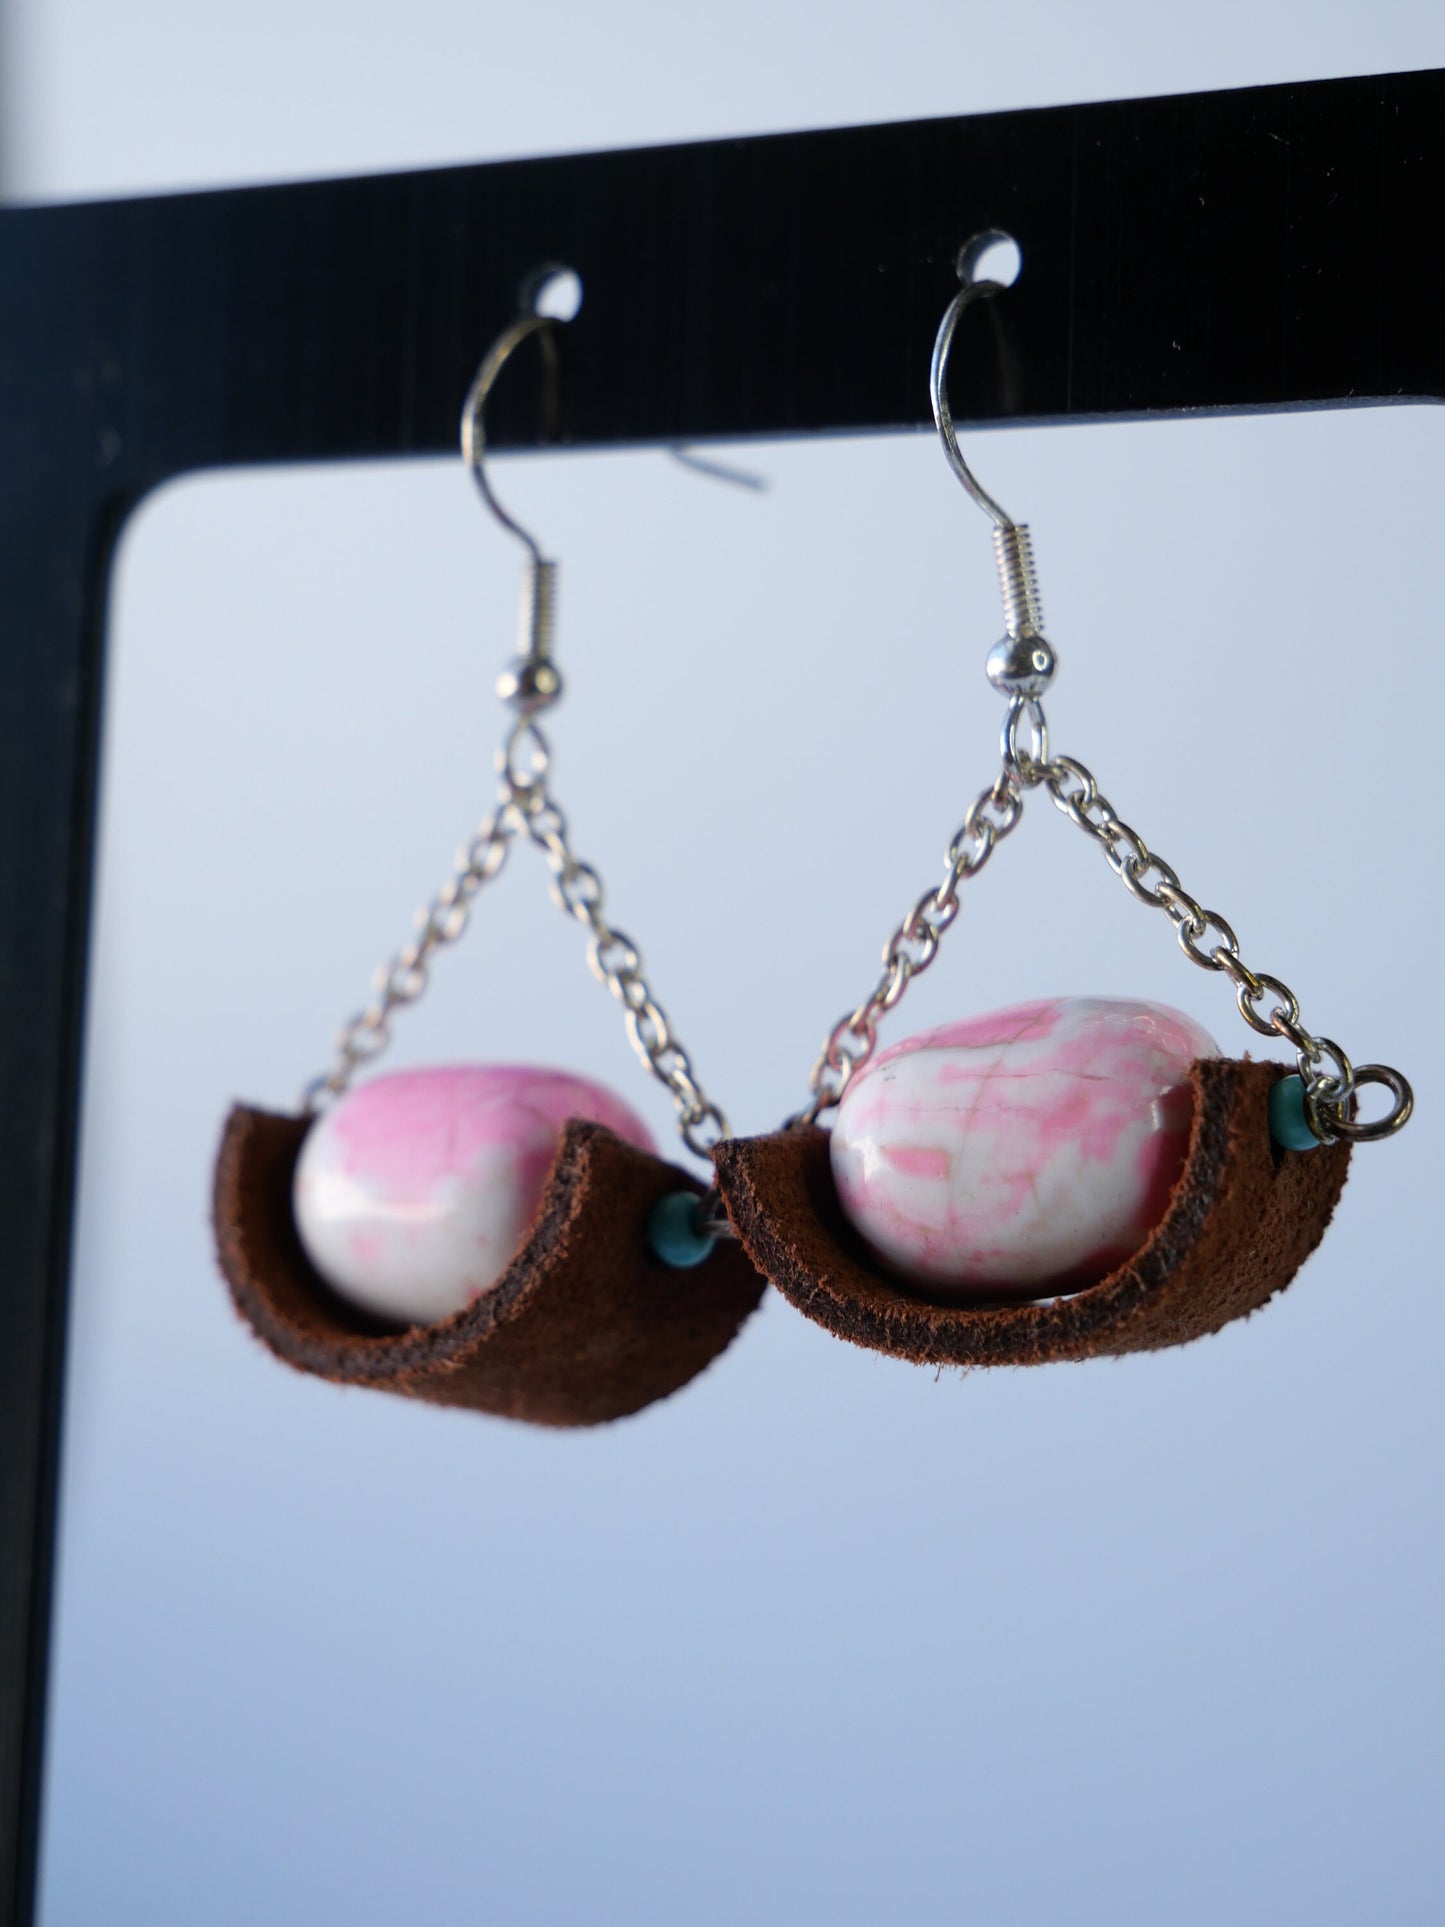 Silver, Leather, Pink Magnesite Dangle Earrings, Hypoallergenic, Made in Maine, Inspired by Maine